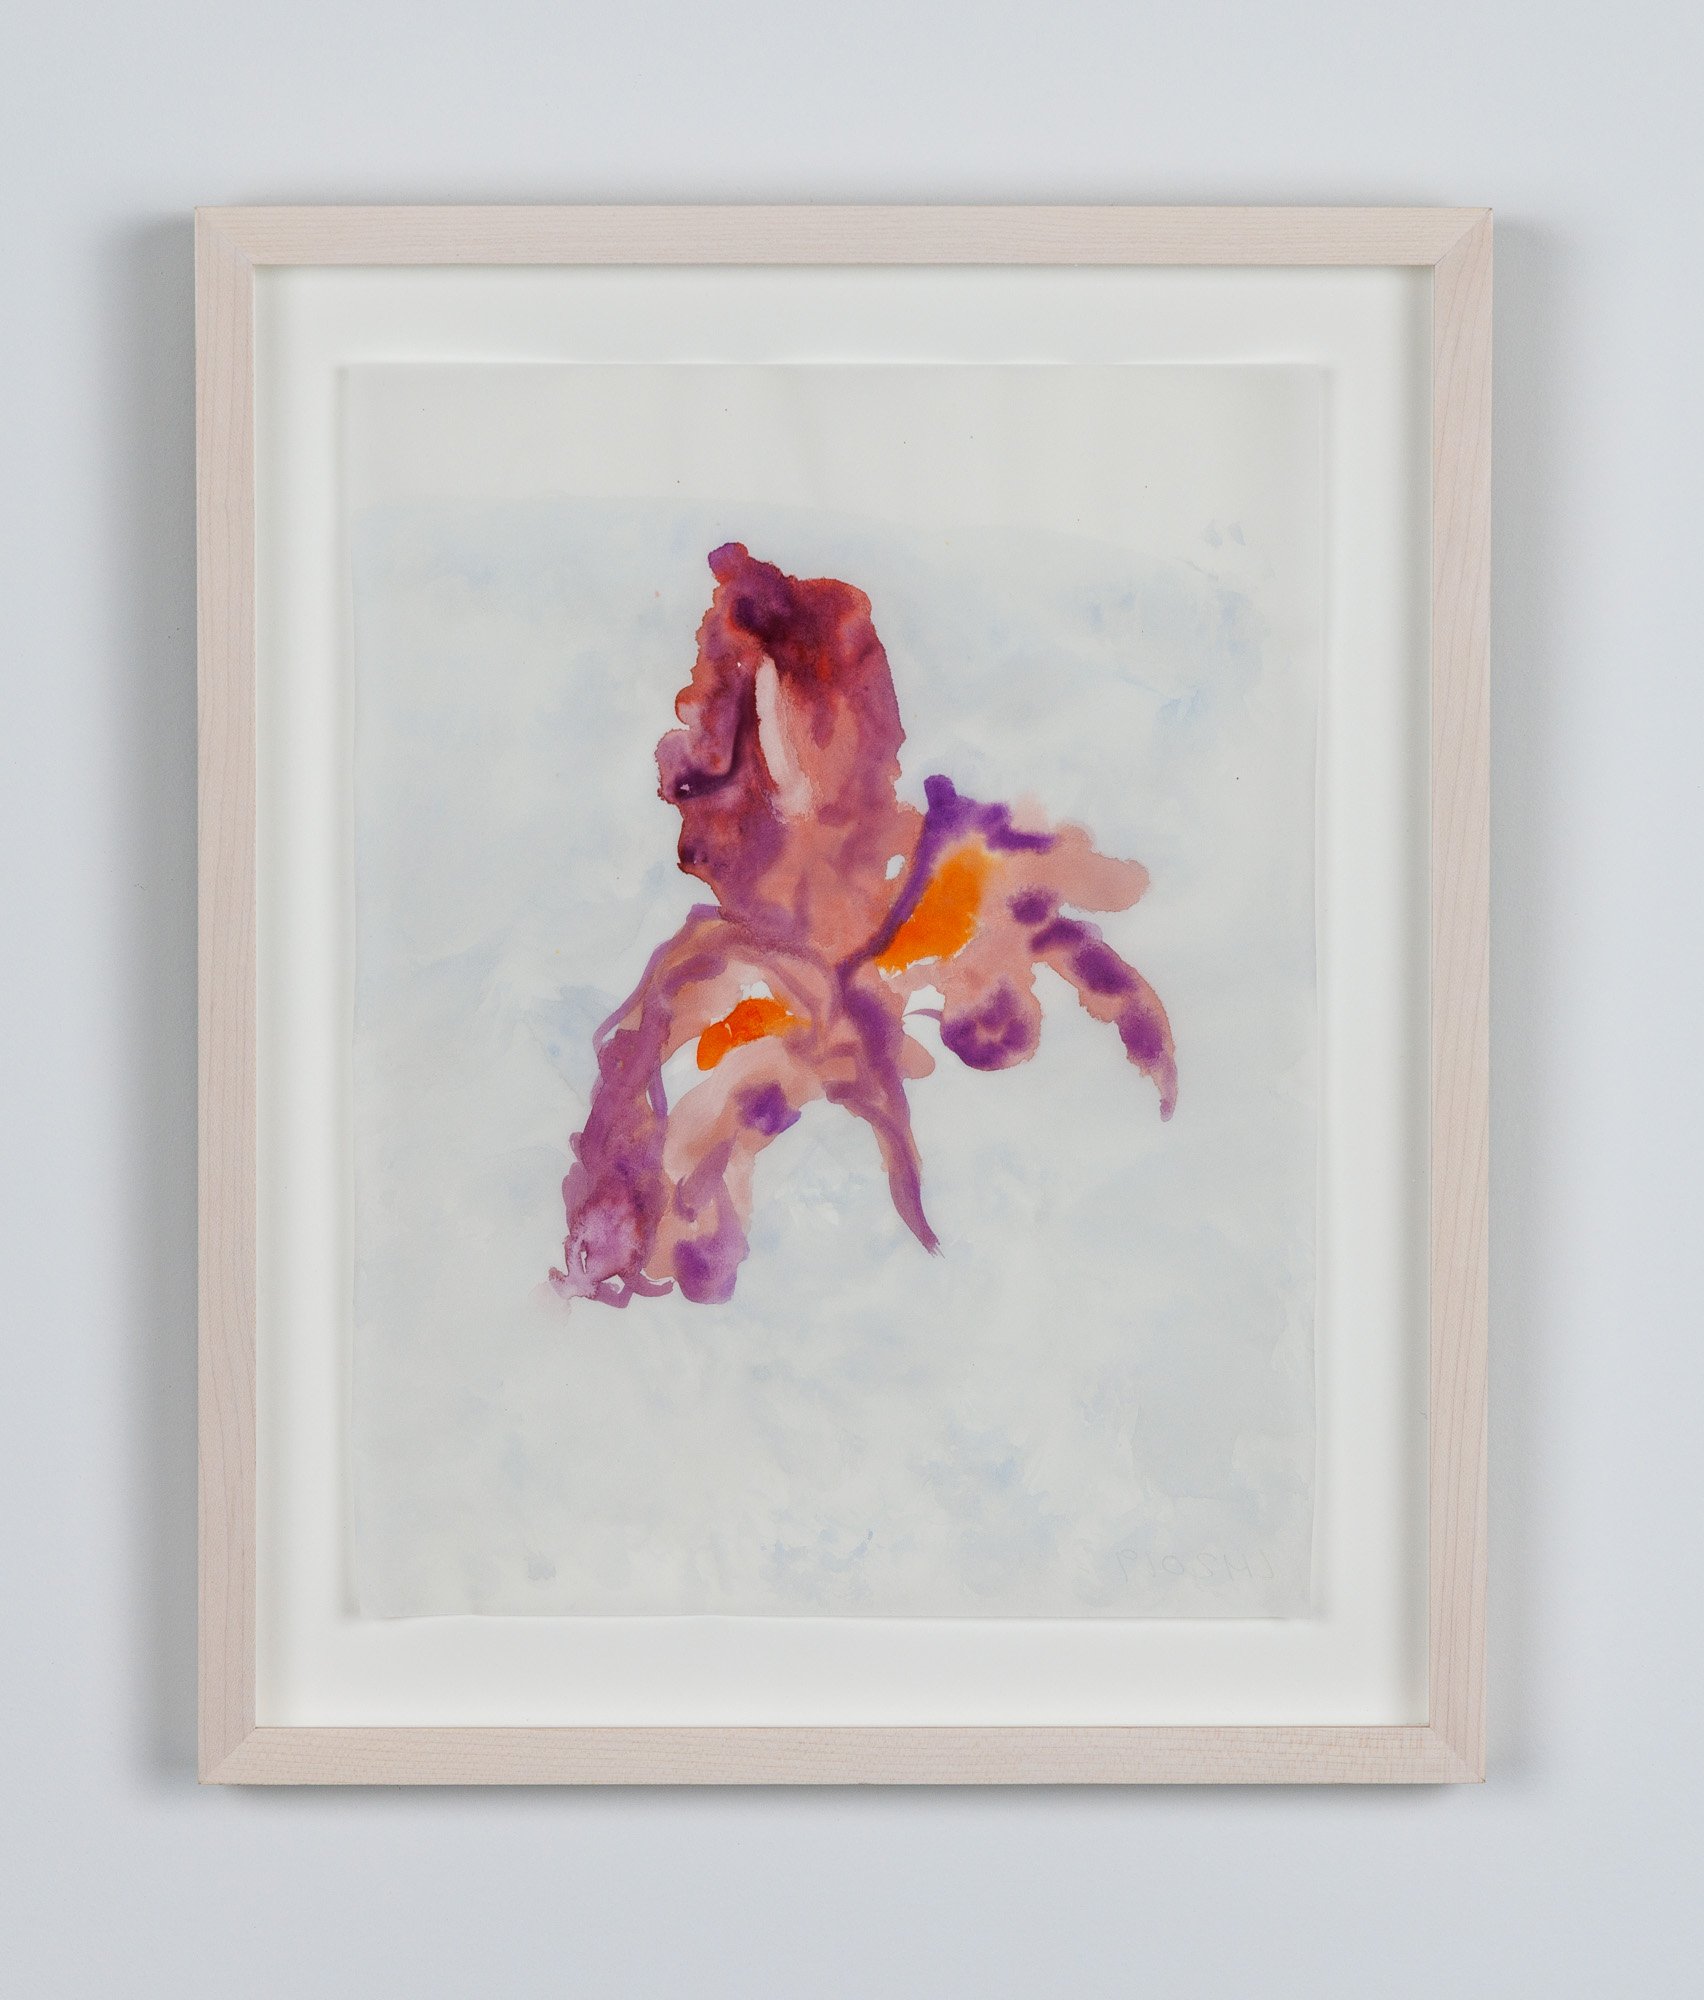  Laura Hunt,  Unreal Iris , 2019, watercolor on vellum, framed, 13.75 x 11.25 inches. 